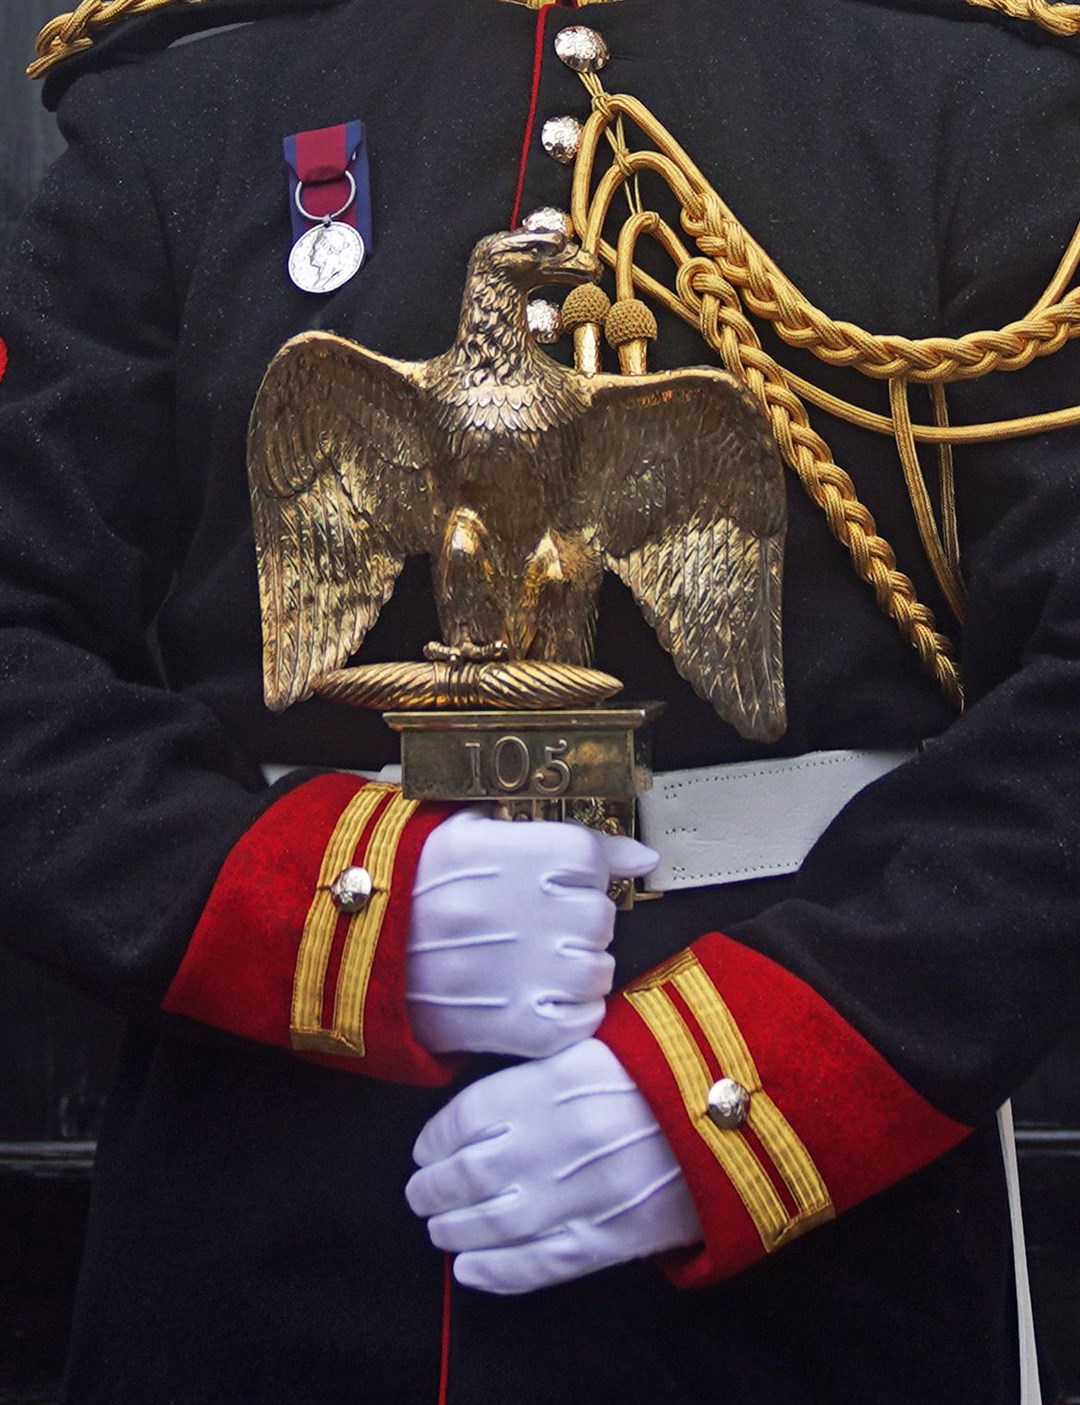 The Waterloo Eagle arrived in London on June 21 1815 (Victoria Jones/PA)